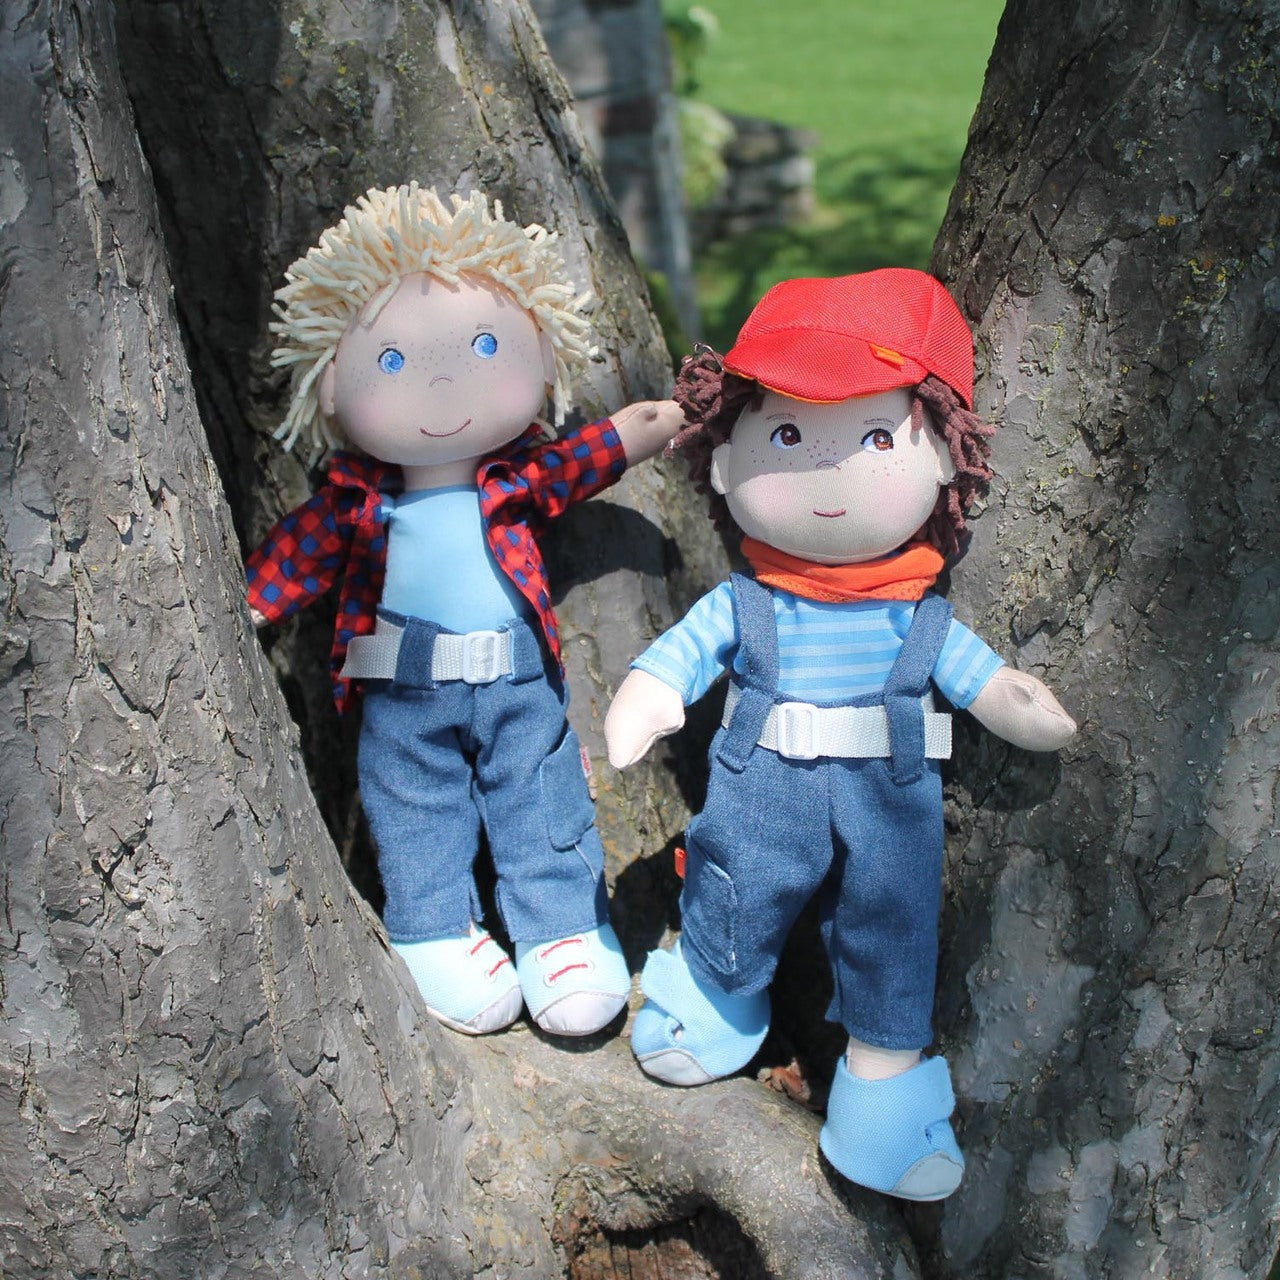 Our two most popular 12 inch boy dolls from HABA : Graham and Nick